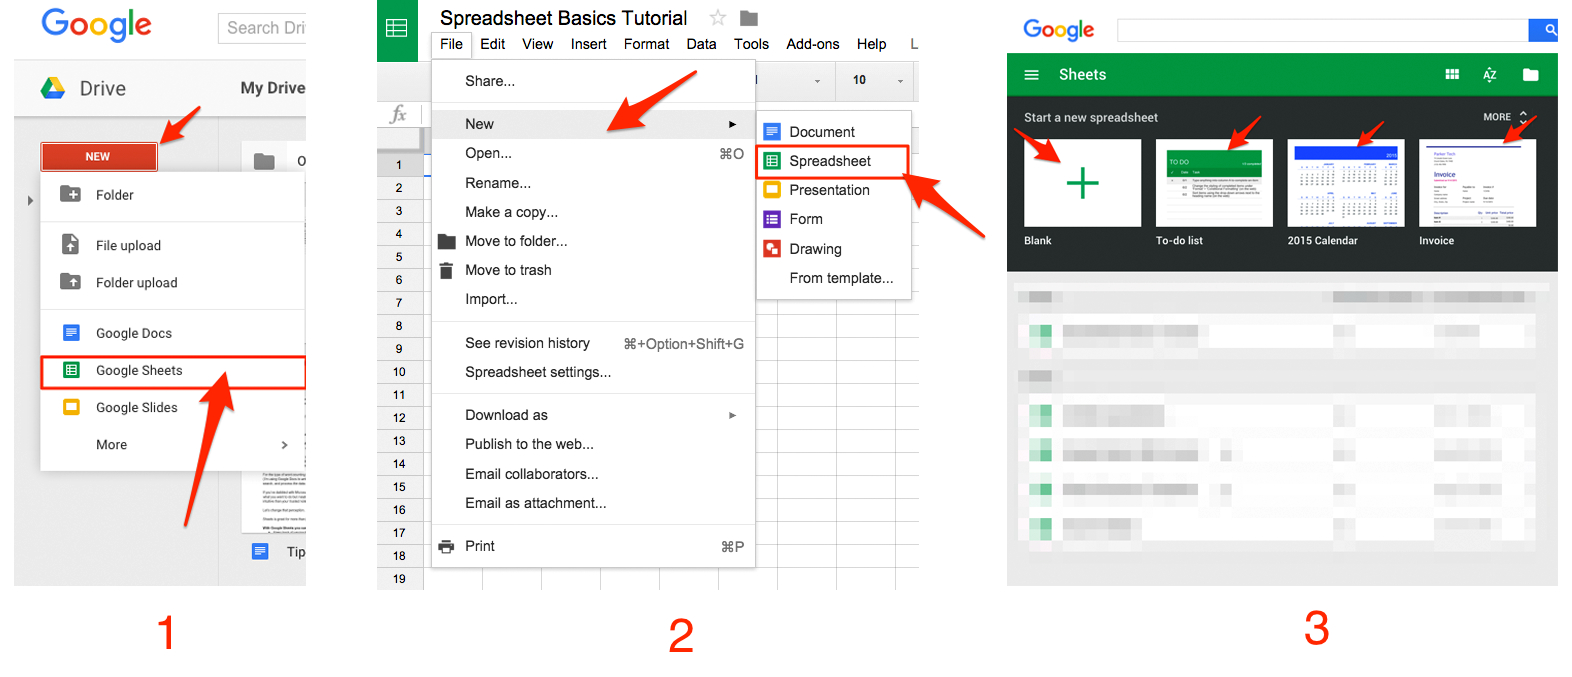 Free Online Excel Spreadsheet Tutorial With Google Sheets 101: The Beginner's Guide To Online Spreadsheets  The